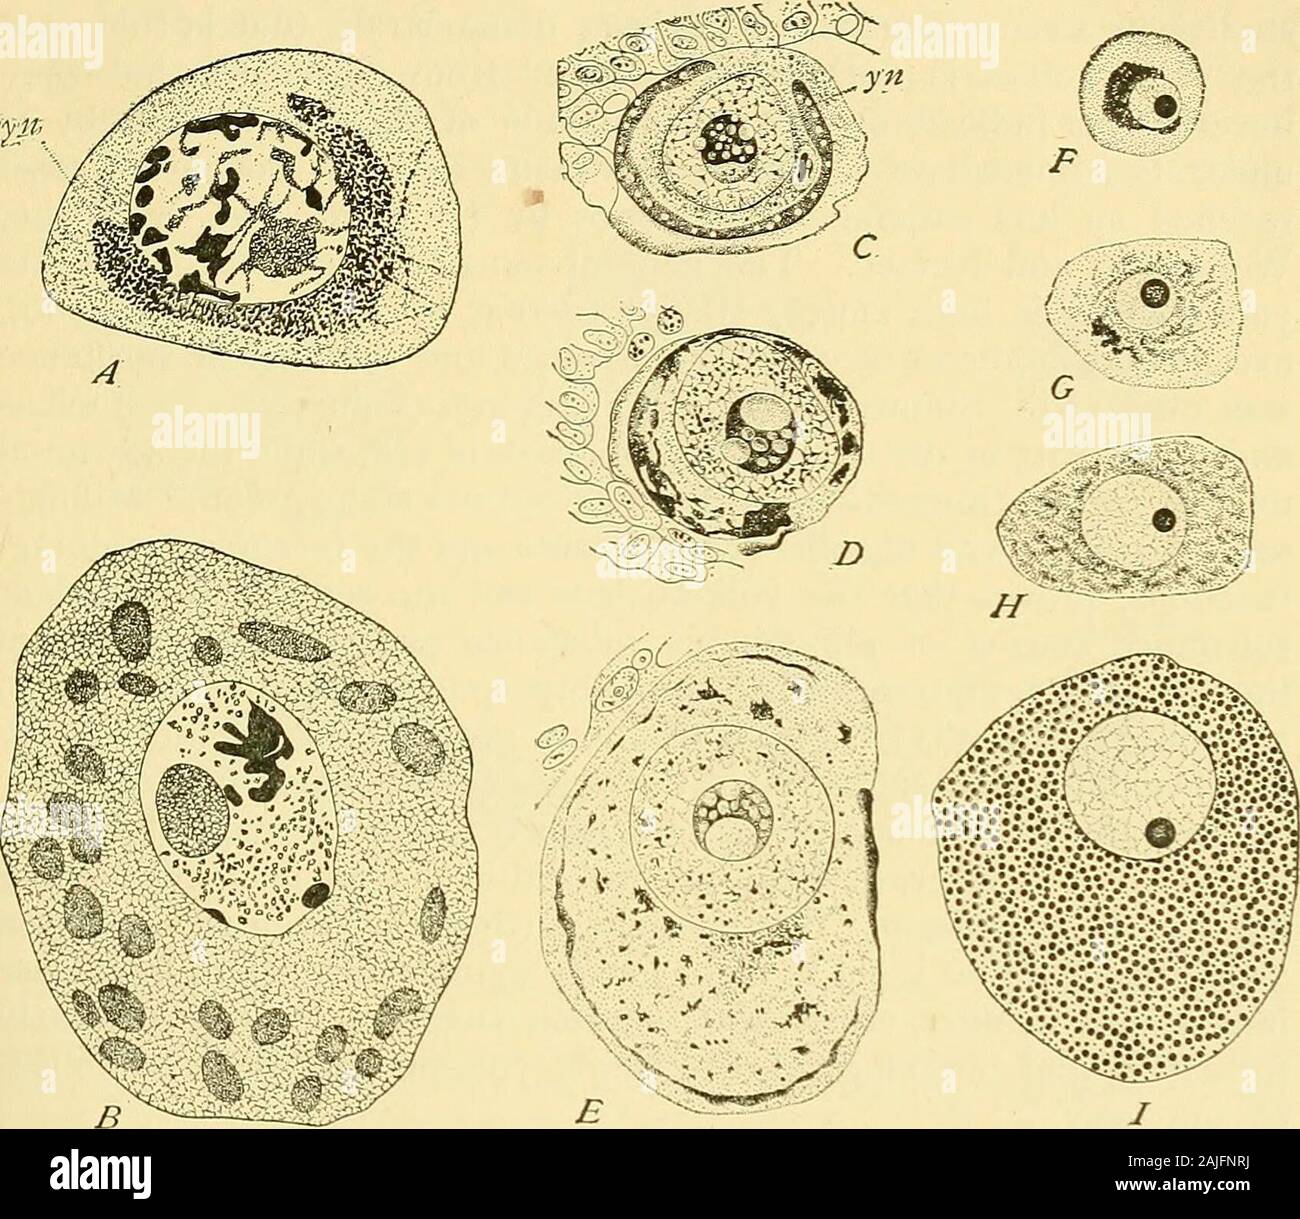 The cell in development and inheritance . eggs of Cyma-togaster (Hubbard, 94) Syngnathns (Henneguy, 96), the earthworm(Calkins, 95, Foot, 96), Polyzoiiiiini and other myriapods (Nemec,97, Van Bambeke, 98), LinndiLS (Munson, 98), Cypris (Woltereck,98), and Molgida (Crampton, 99). In nearly all of these forms theyolk-nucleus first appears in the form of a cap closely applied to oneside of the nucleus (Figs. 80, 81), sometimes so closely united to thelatter that it is difficult to trace a boundary between them. At alater period the yolk-nucleus moves away from the nucleus and in GROWTH AND DIFFER Stock Photo